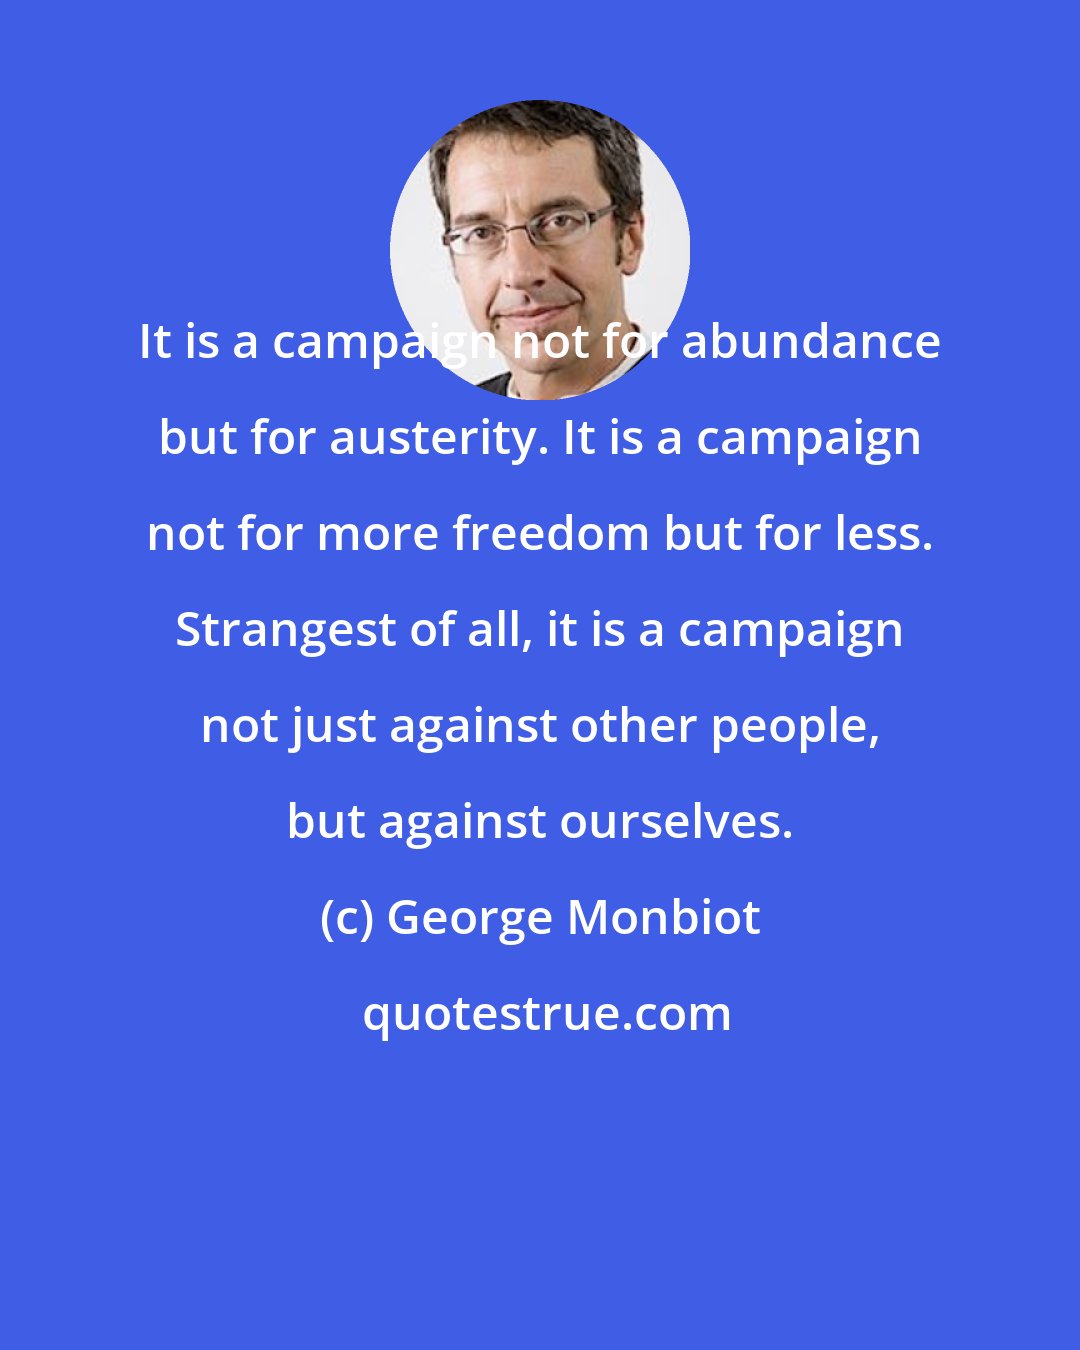 George Monbiot: It is a campaign not for abundance but for austerity. It is a campaign not for more freedom but for less. Strangest of all, it is a campaign not just against other people, but against ourselves.